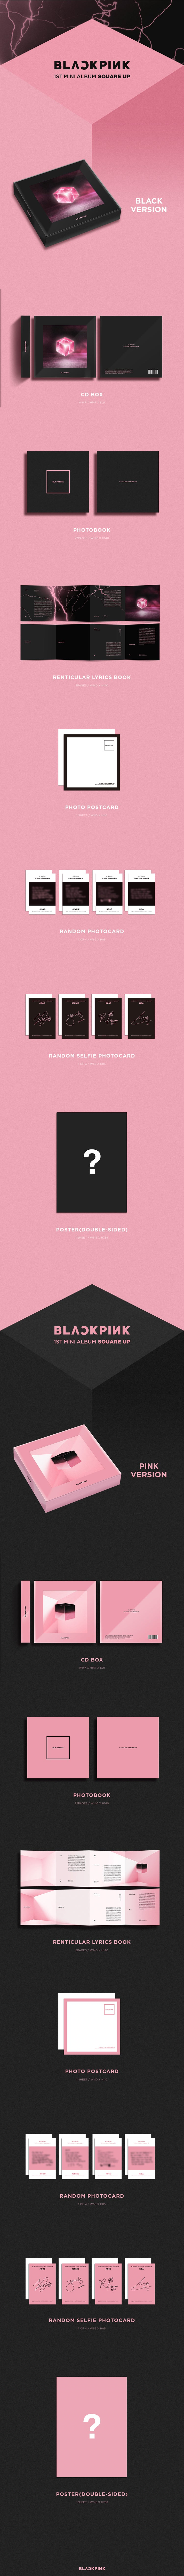 Square Up is the first Korean extended play (second overall) by South Korean girl group Blackpink, released on June 15, 2018 by YG Entertainment.[3] It is available in two versions and contains four tracks, with "Ddu-Du Ddu-Du" released as the lead single. "Ddu-Du Ddu-Du" peaked at number one in South Korea for three weeks and became the highest-charting song by a female K-pop act in the United States and United Kingdom. The song "Forever Young" was later promoted in Korean music programs and peaked at number two in South Korea.